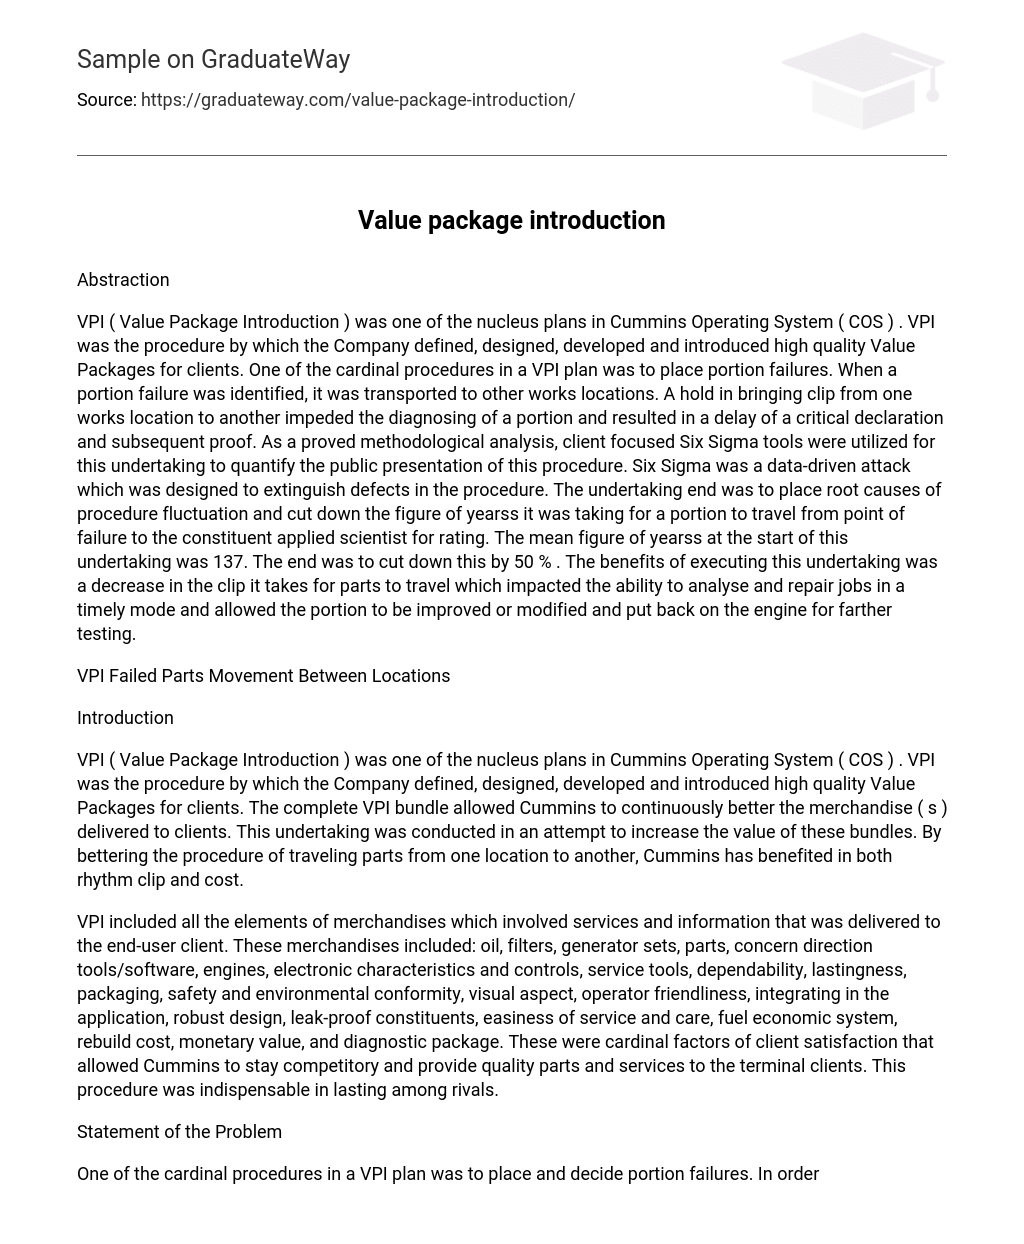 Value package introduction